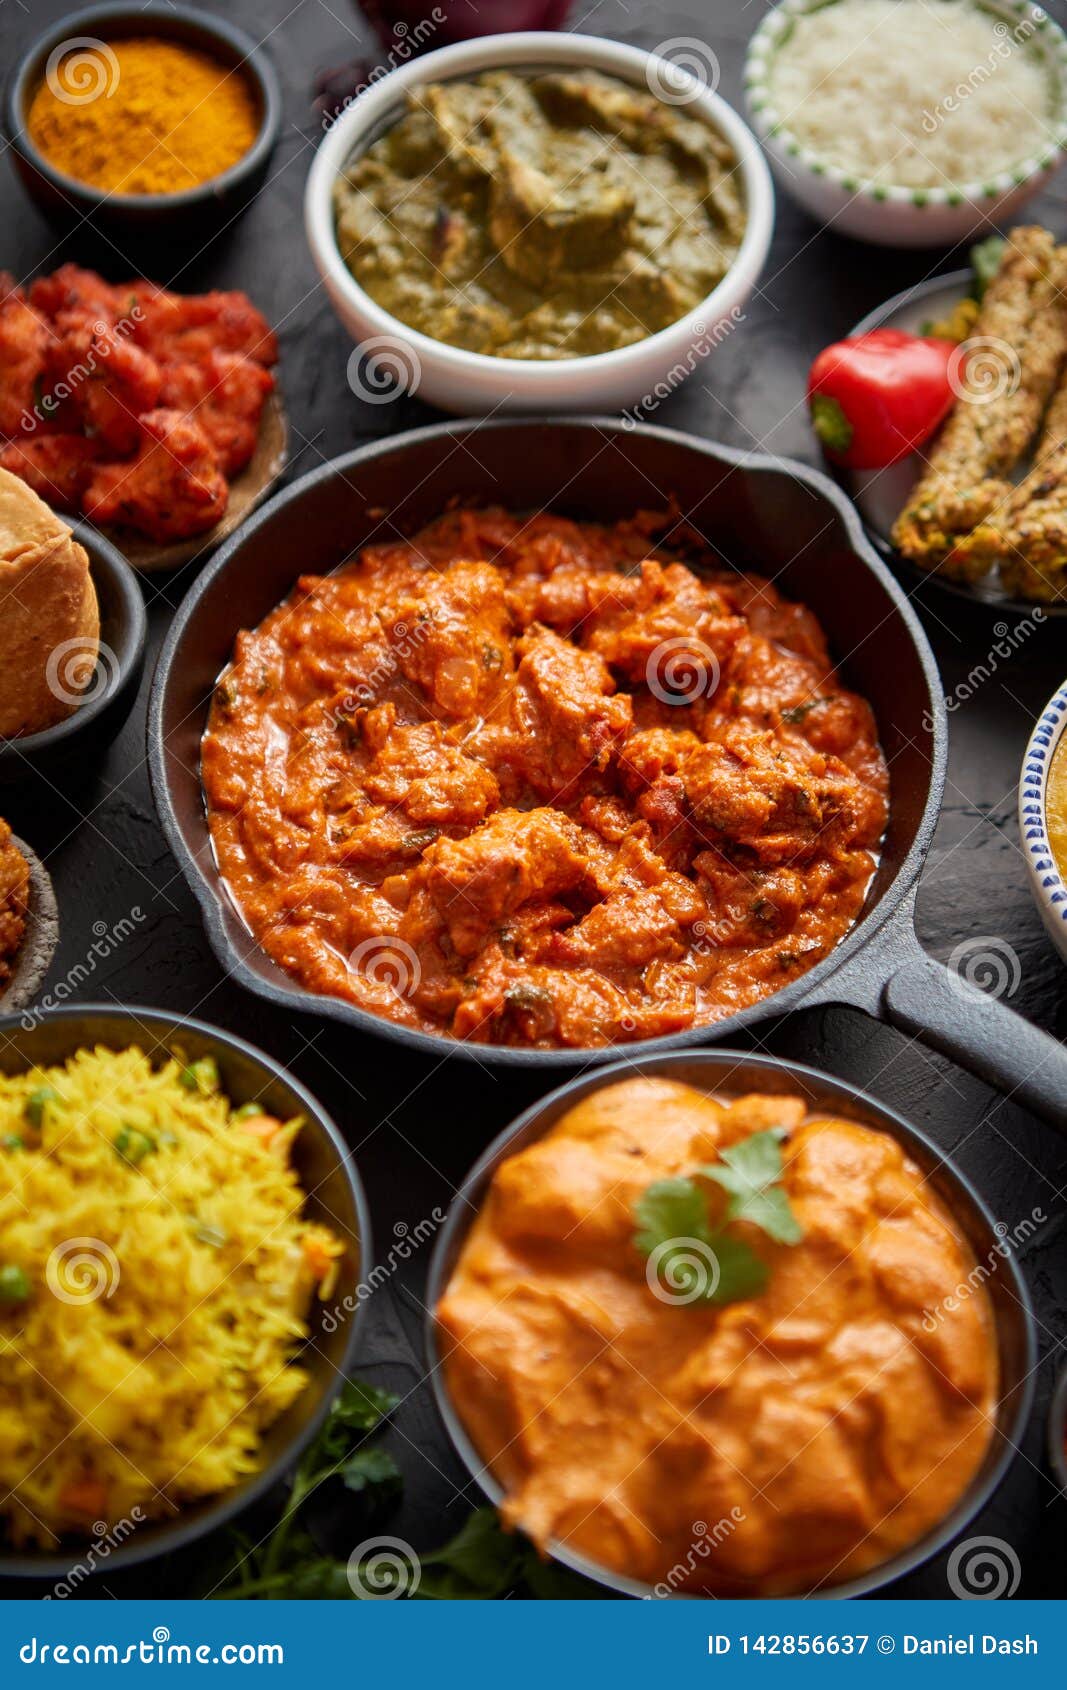 various indian dishes on a table. spicy chicken tikka masala in iron pan